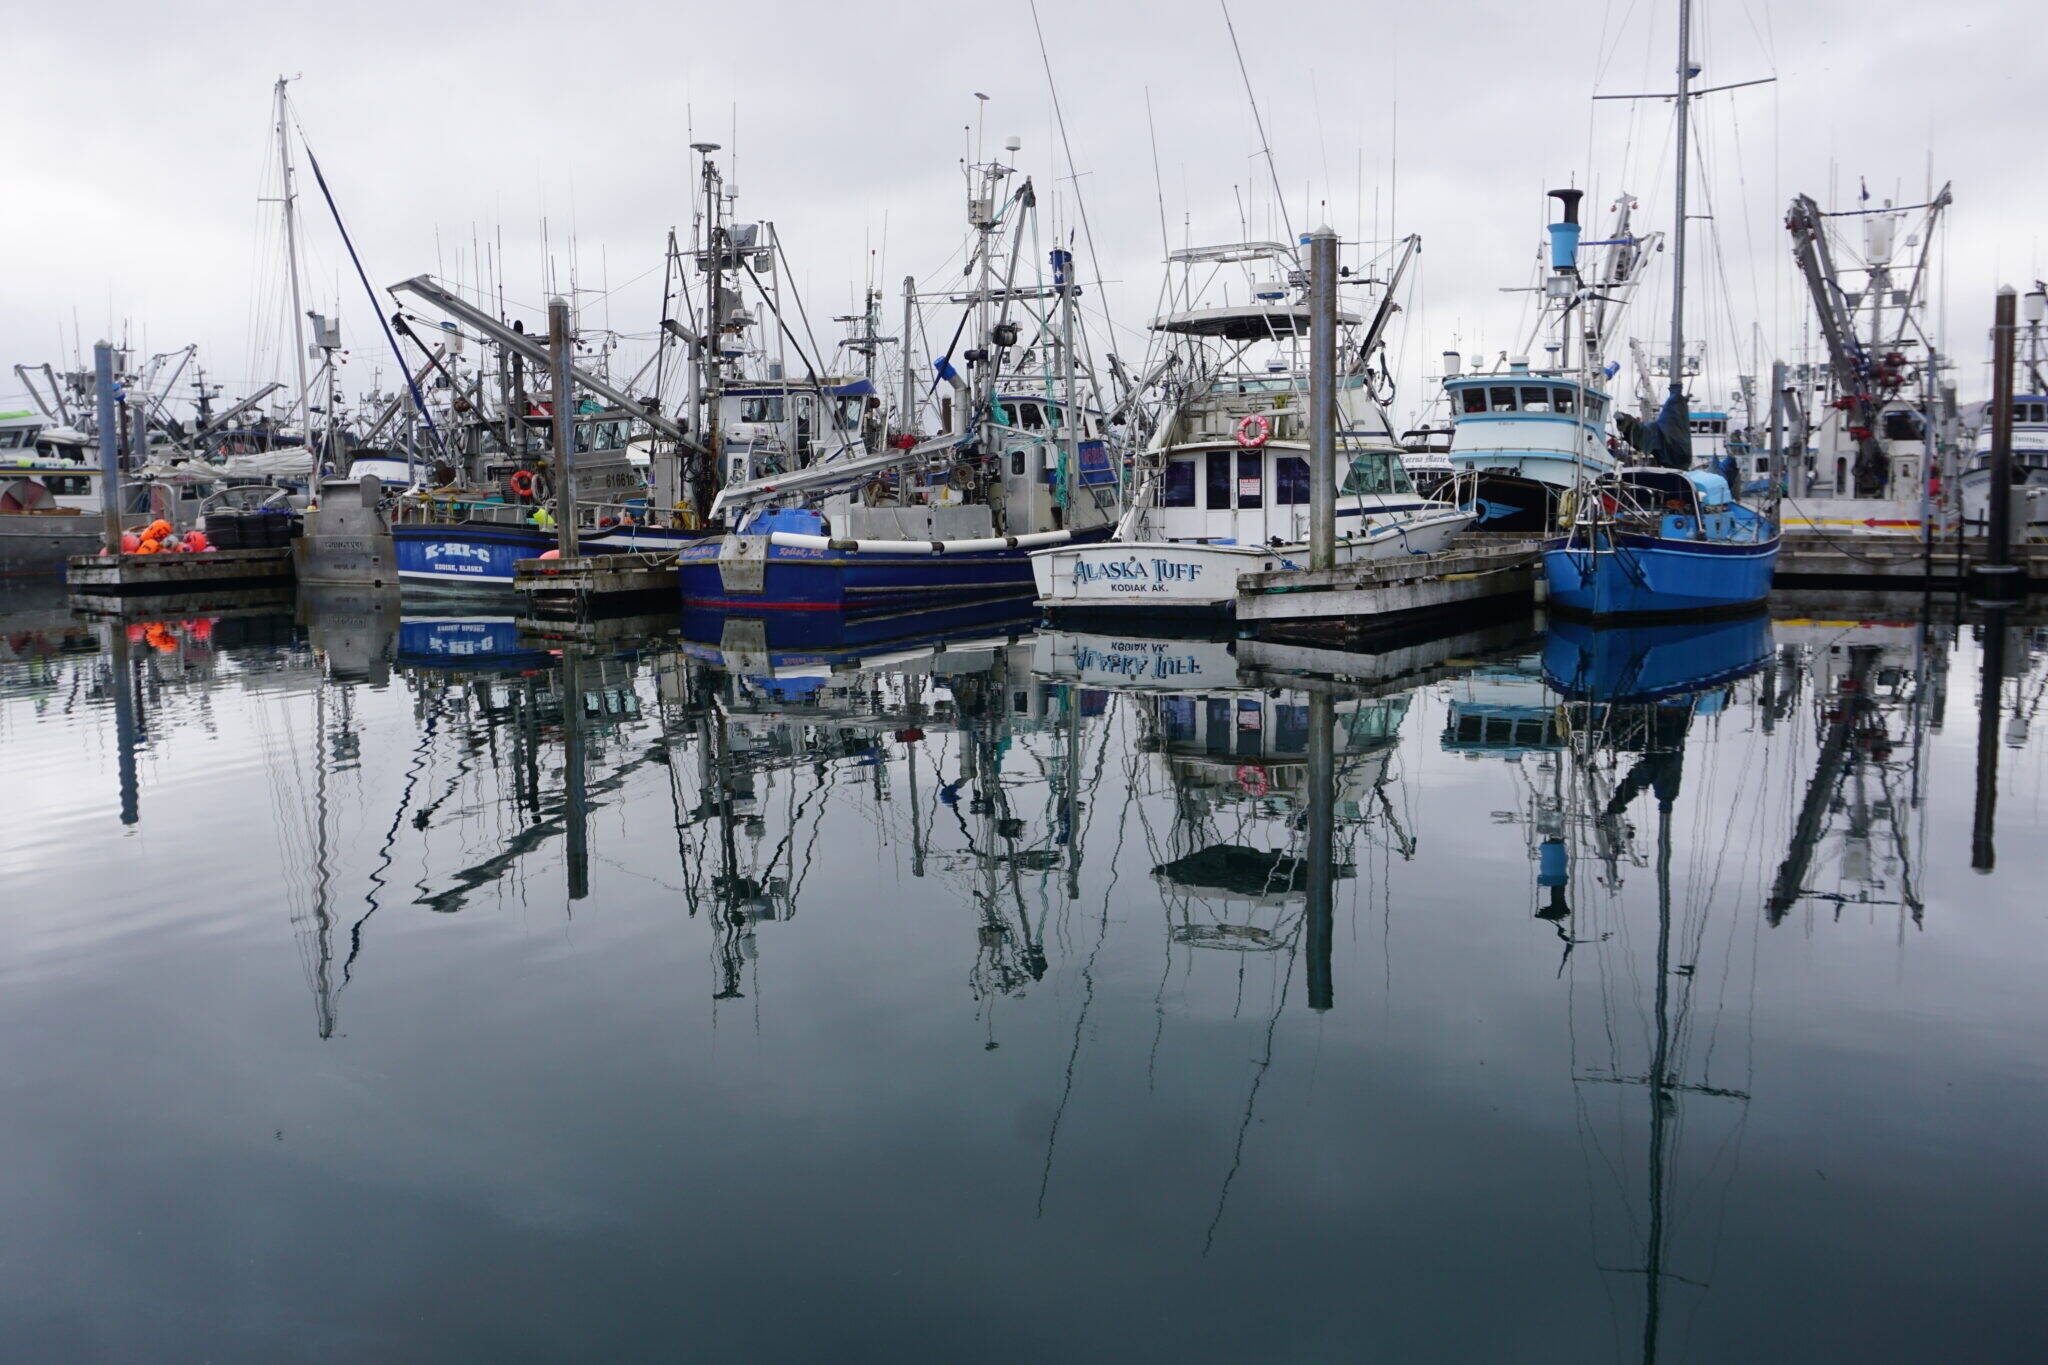 Fishing boats are lined up on Oct. 3, 2022, at a dock at Kodiak’s St. Paul Harbor. Alaska’s fishing industry is being battered by competition from vast quantities of Russian fish, inflation that has reduced seafood demand and other factors. State legislative leaders are proposing a task force to come up with some policy responses to help the industry and those who depend on it. (Yereth Rosen/Alaska Beacon)